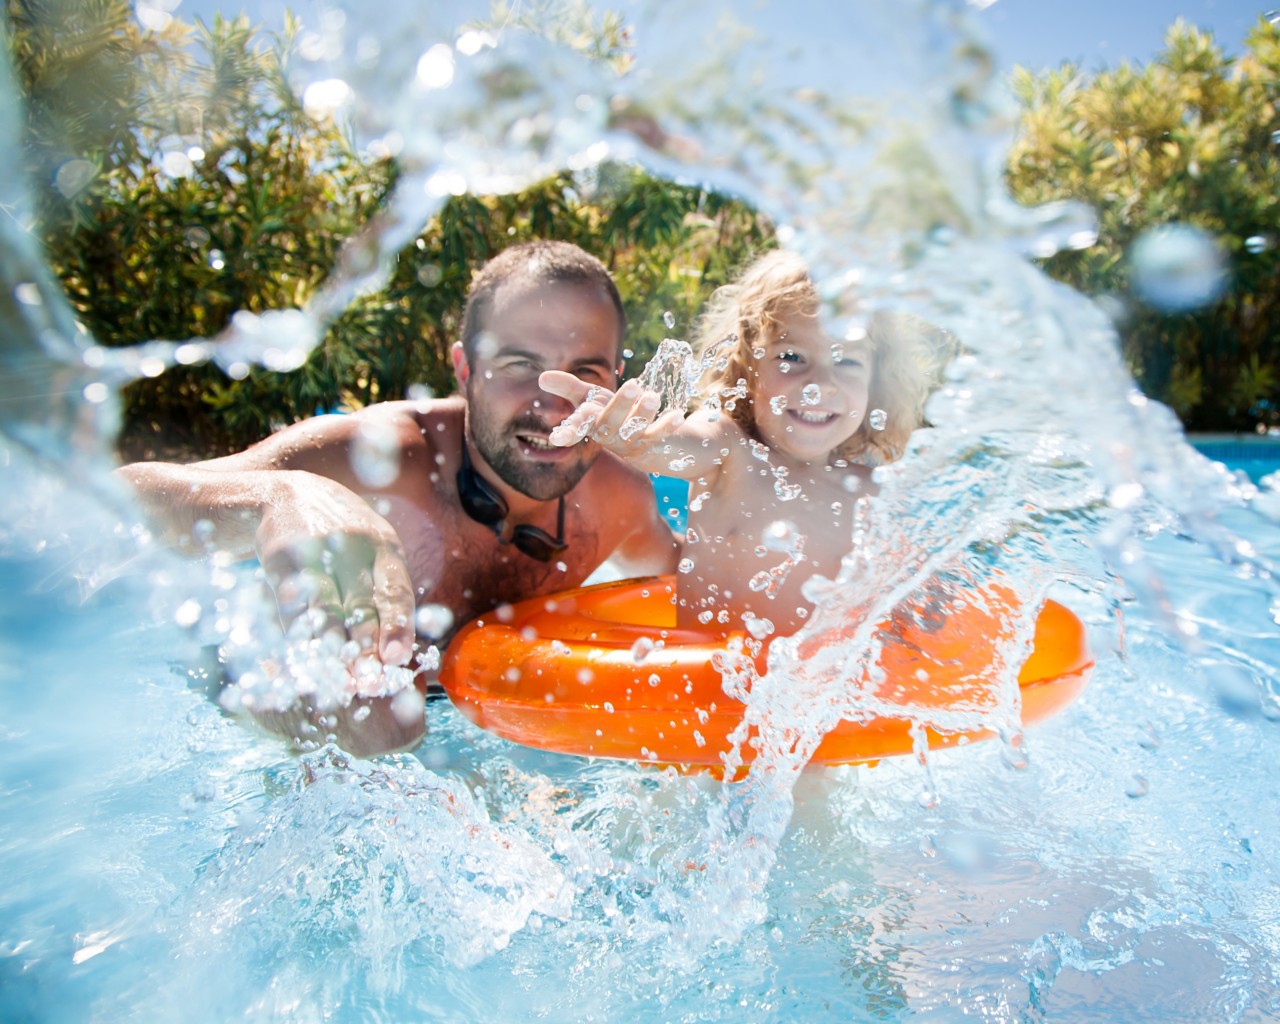 happy-man-and-young-boy-splashing-in-blue-water-on-sunny-day-horizontal-3370x2696-image-file-153362633